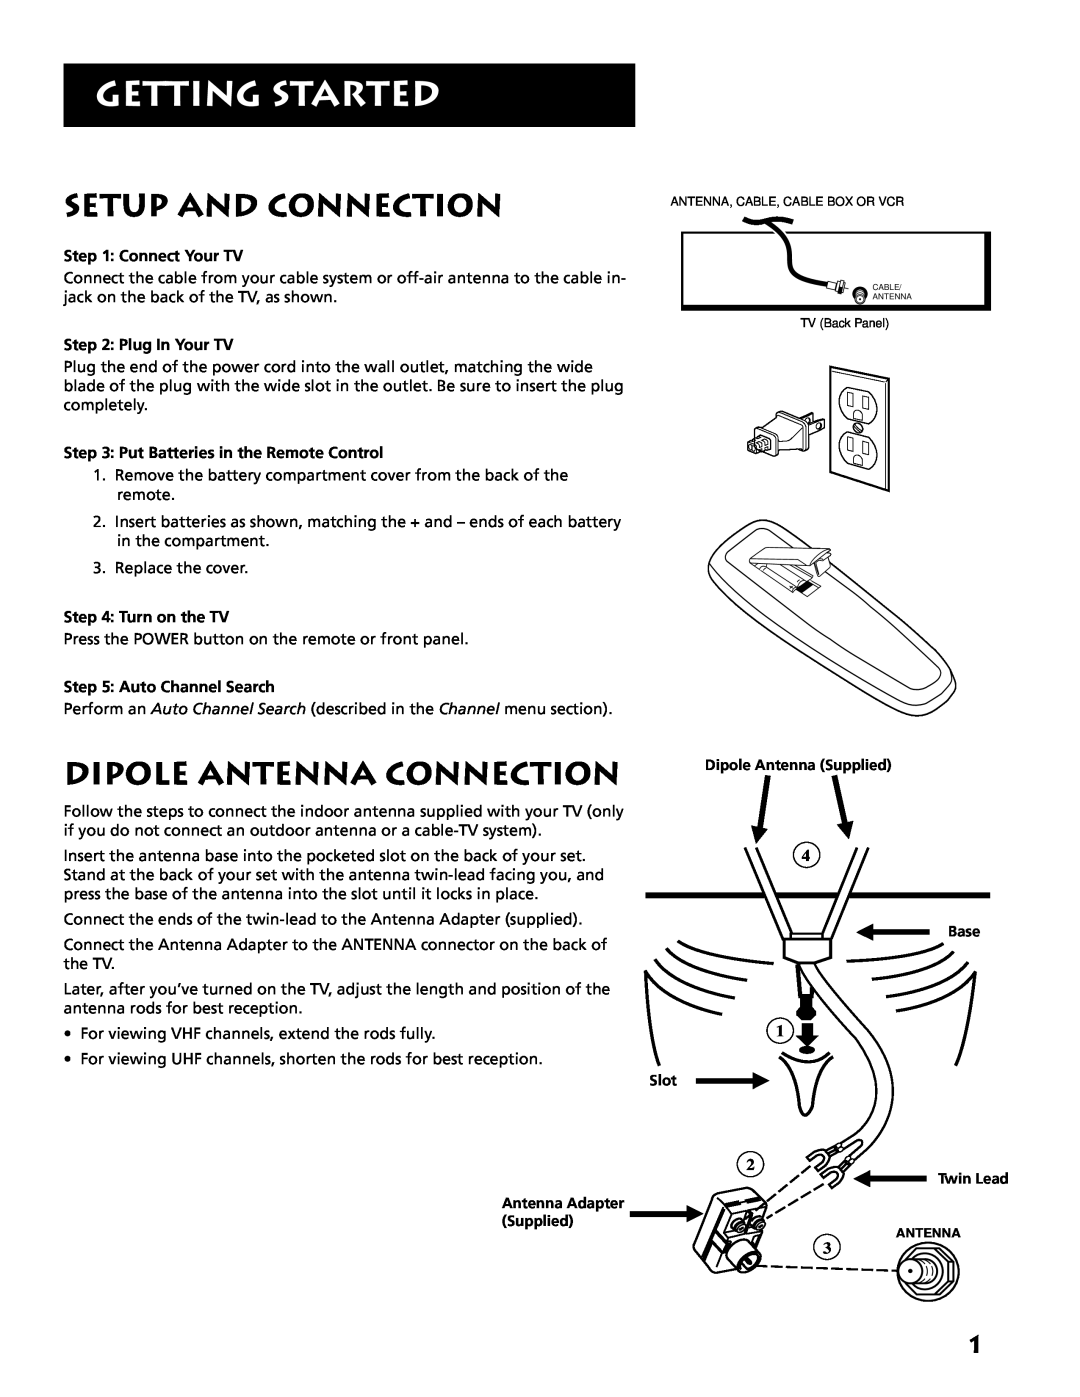 RCA E13318 manual Getting Started, Setup And Connection, Dipole Antenna Connection, Connect Your TV, Plug In Your TV 